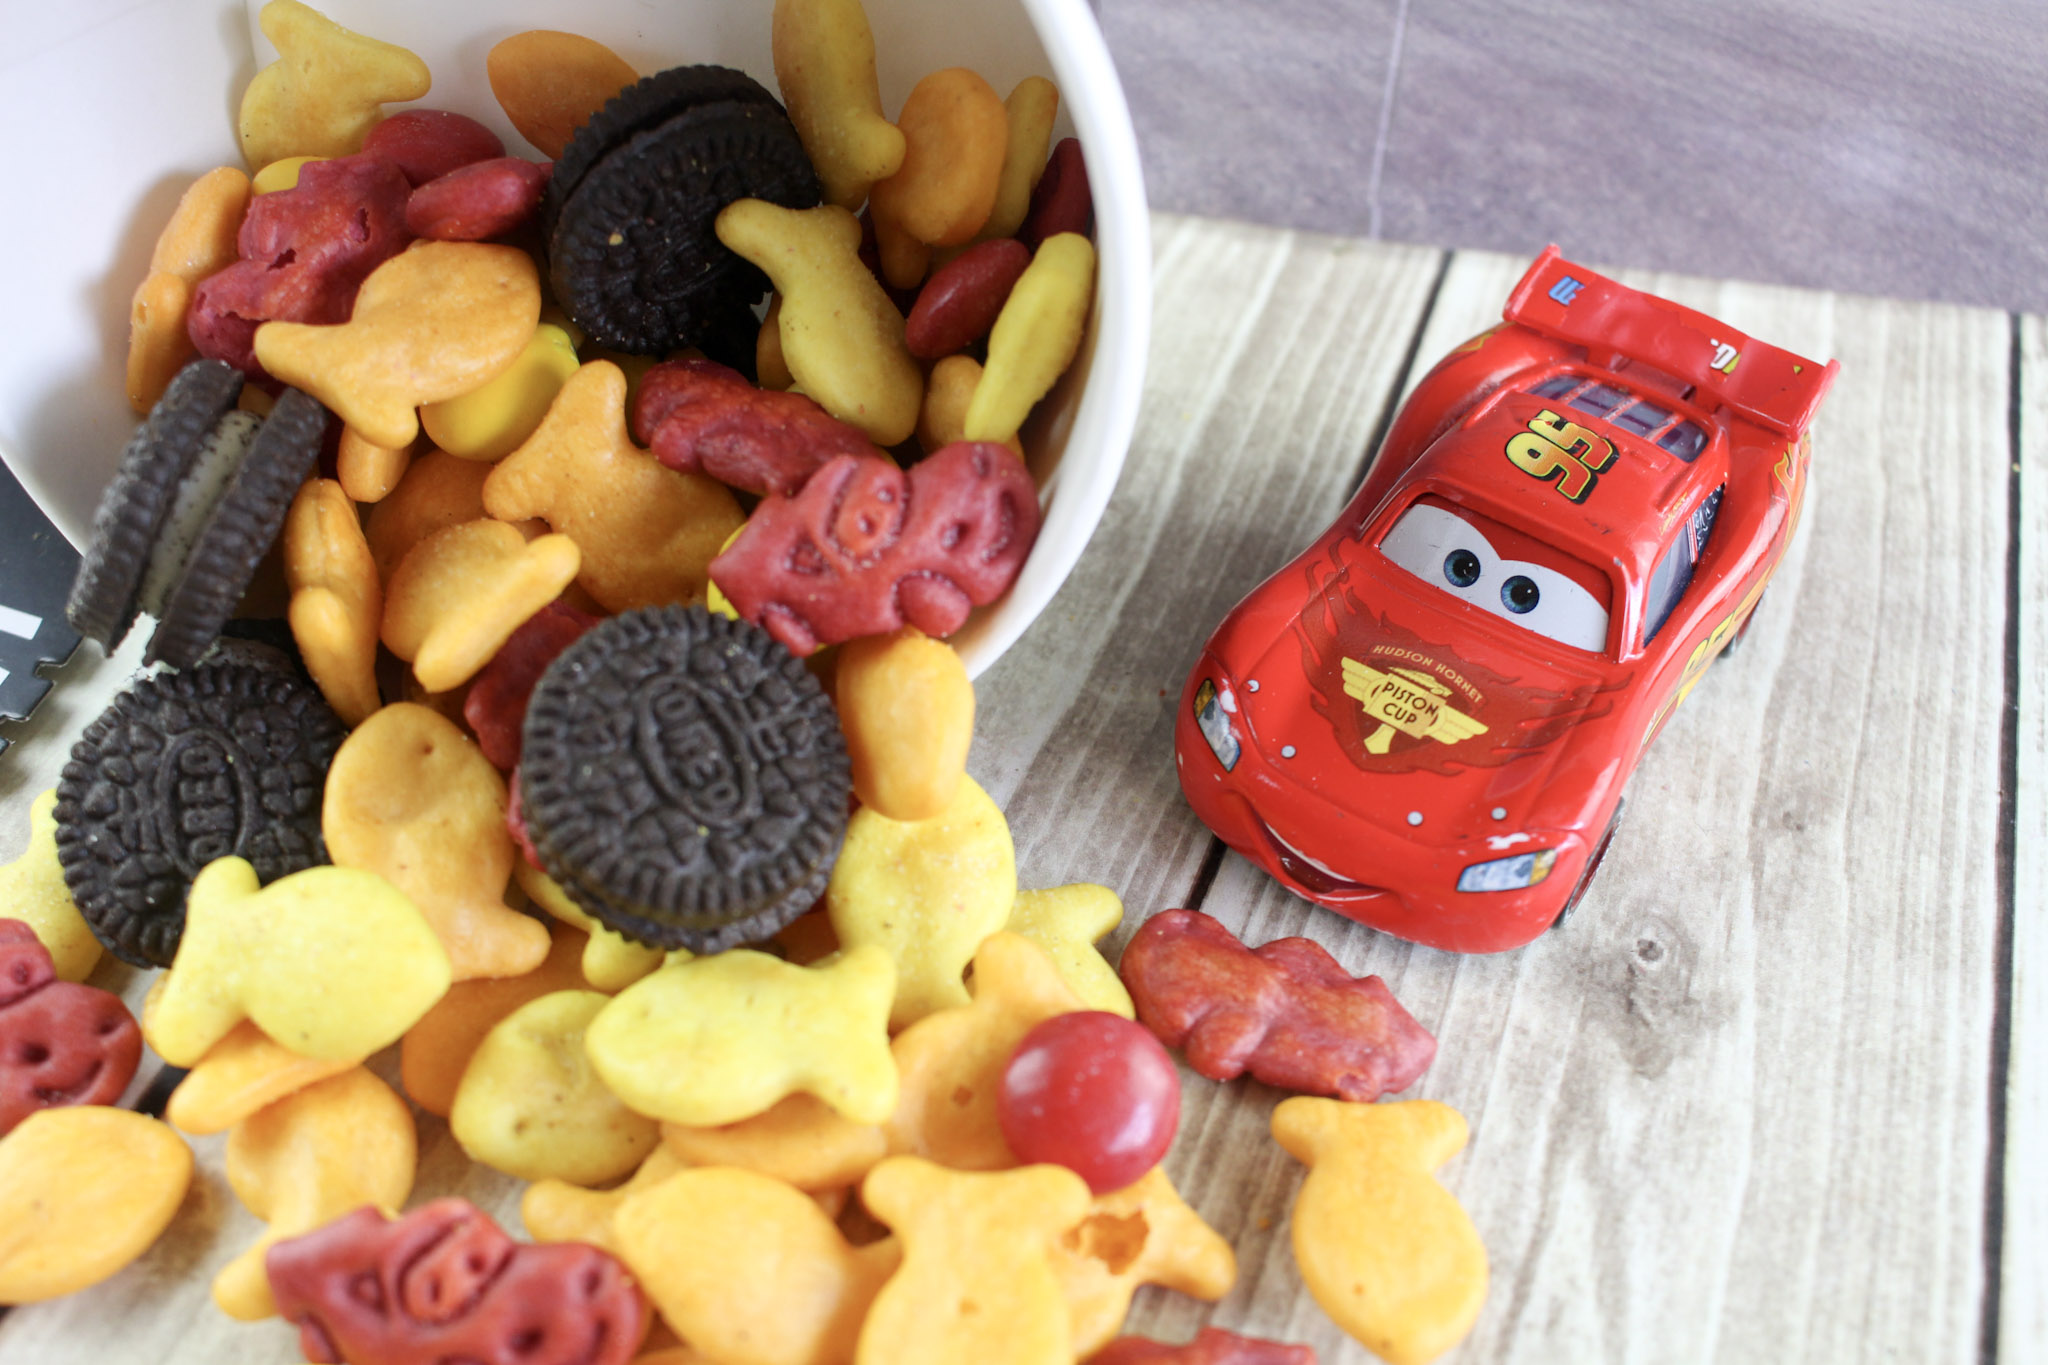 Ready to watch Disney's Cars 3? Make this simple Disney Cars Snack Mix and get ready to enjoy the movie. The kids will love it. 